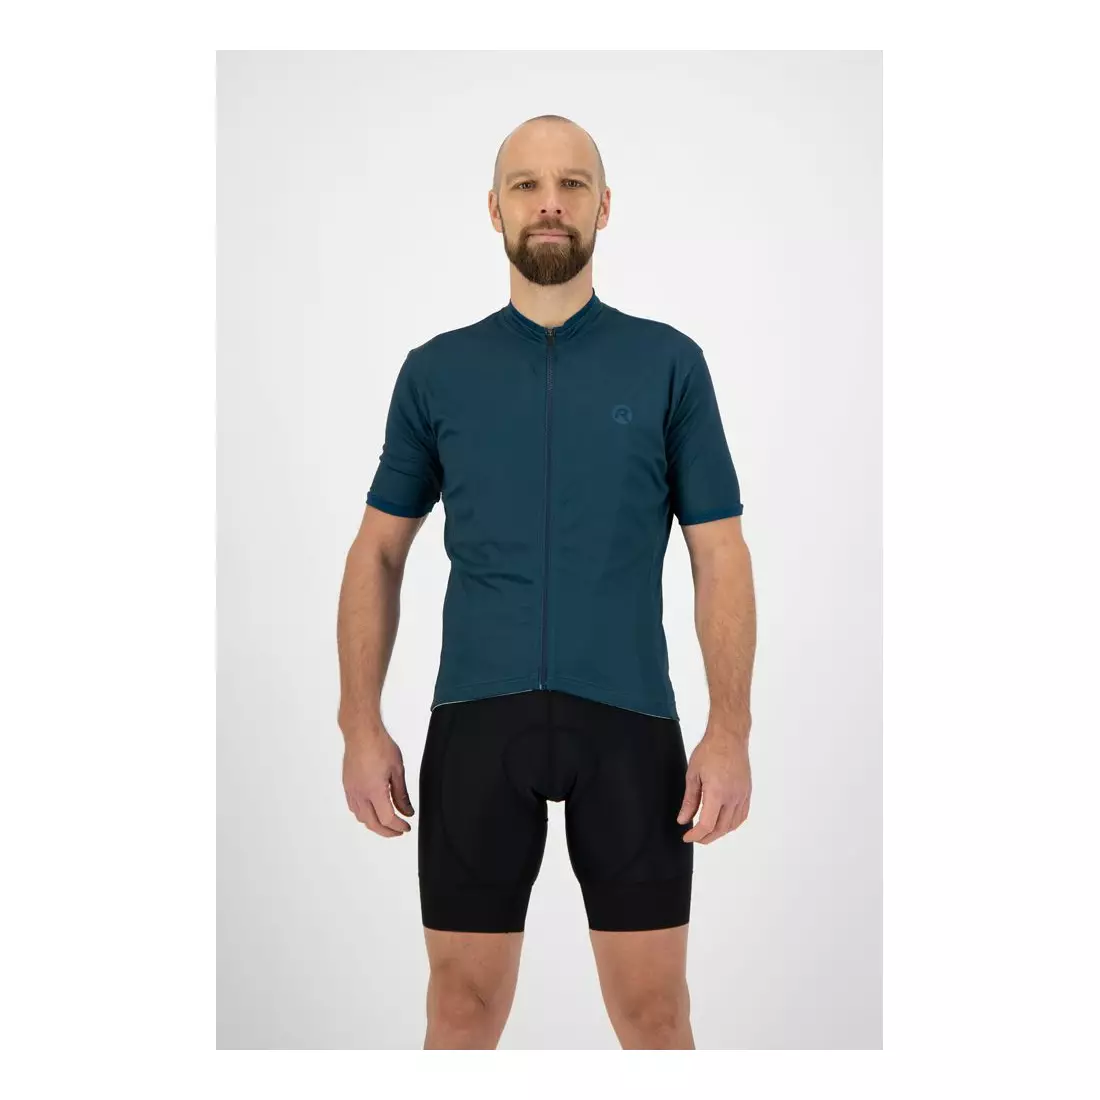 ROGELLI ESSENTIAL men's cycling jersey, dark turquoise